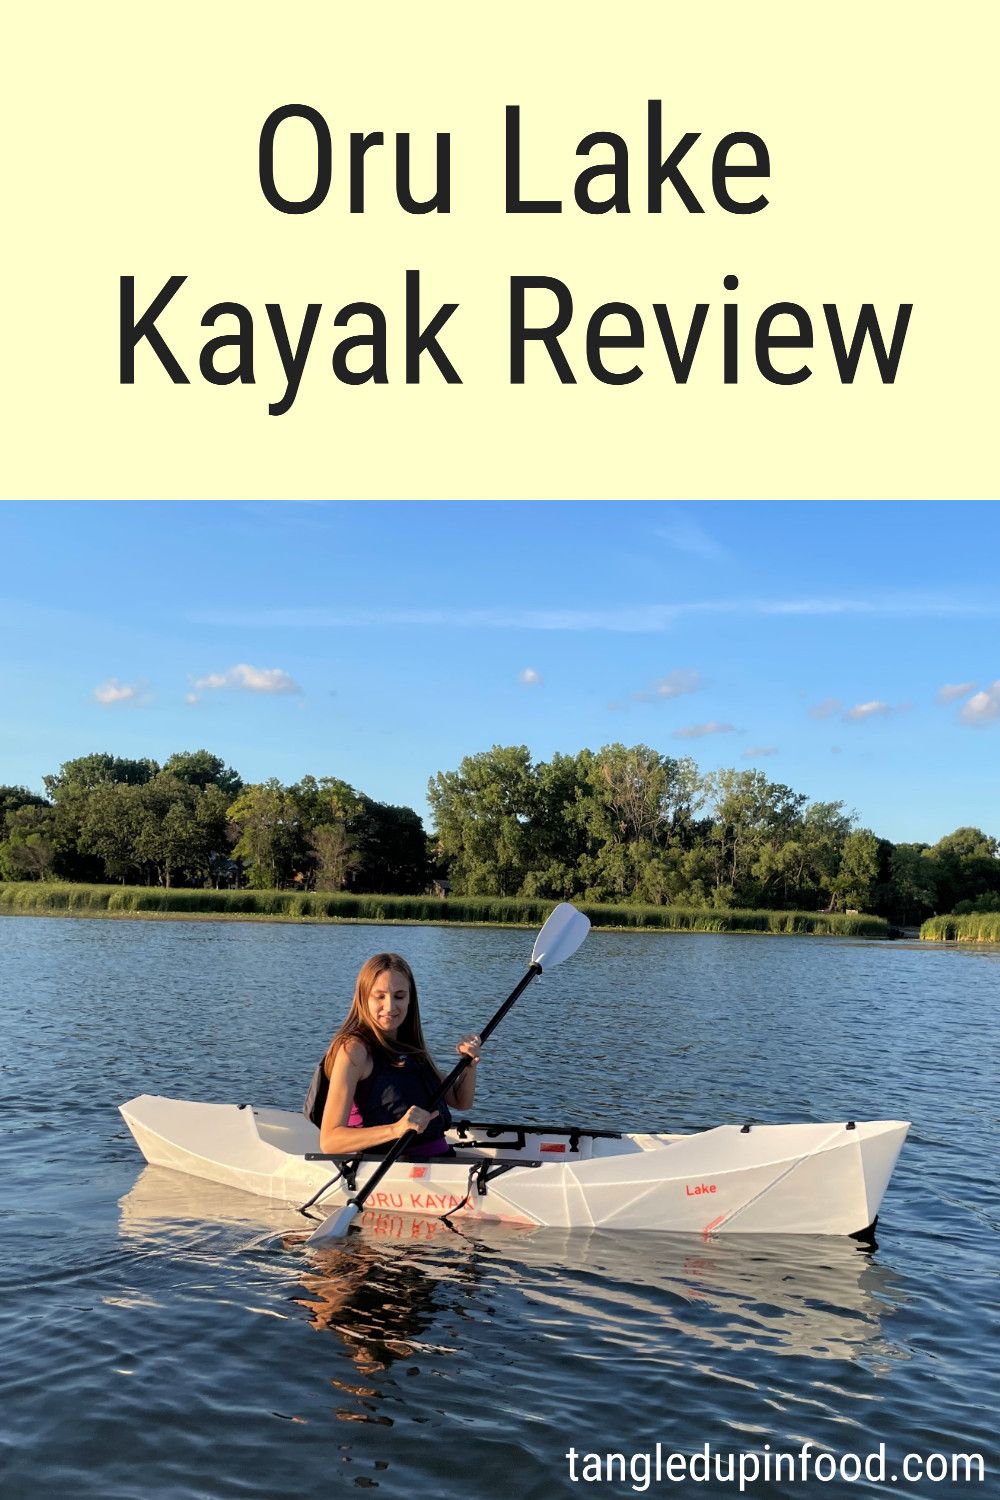 Photo of Stacy in a kayak with text reading "Oru Lake Kayak Review"